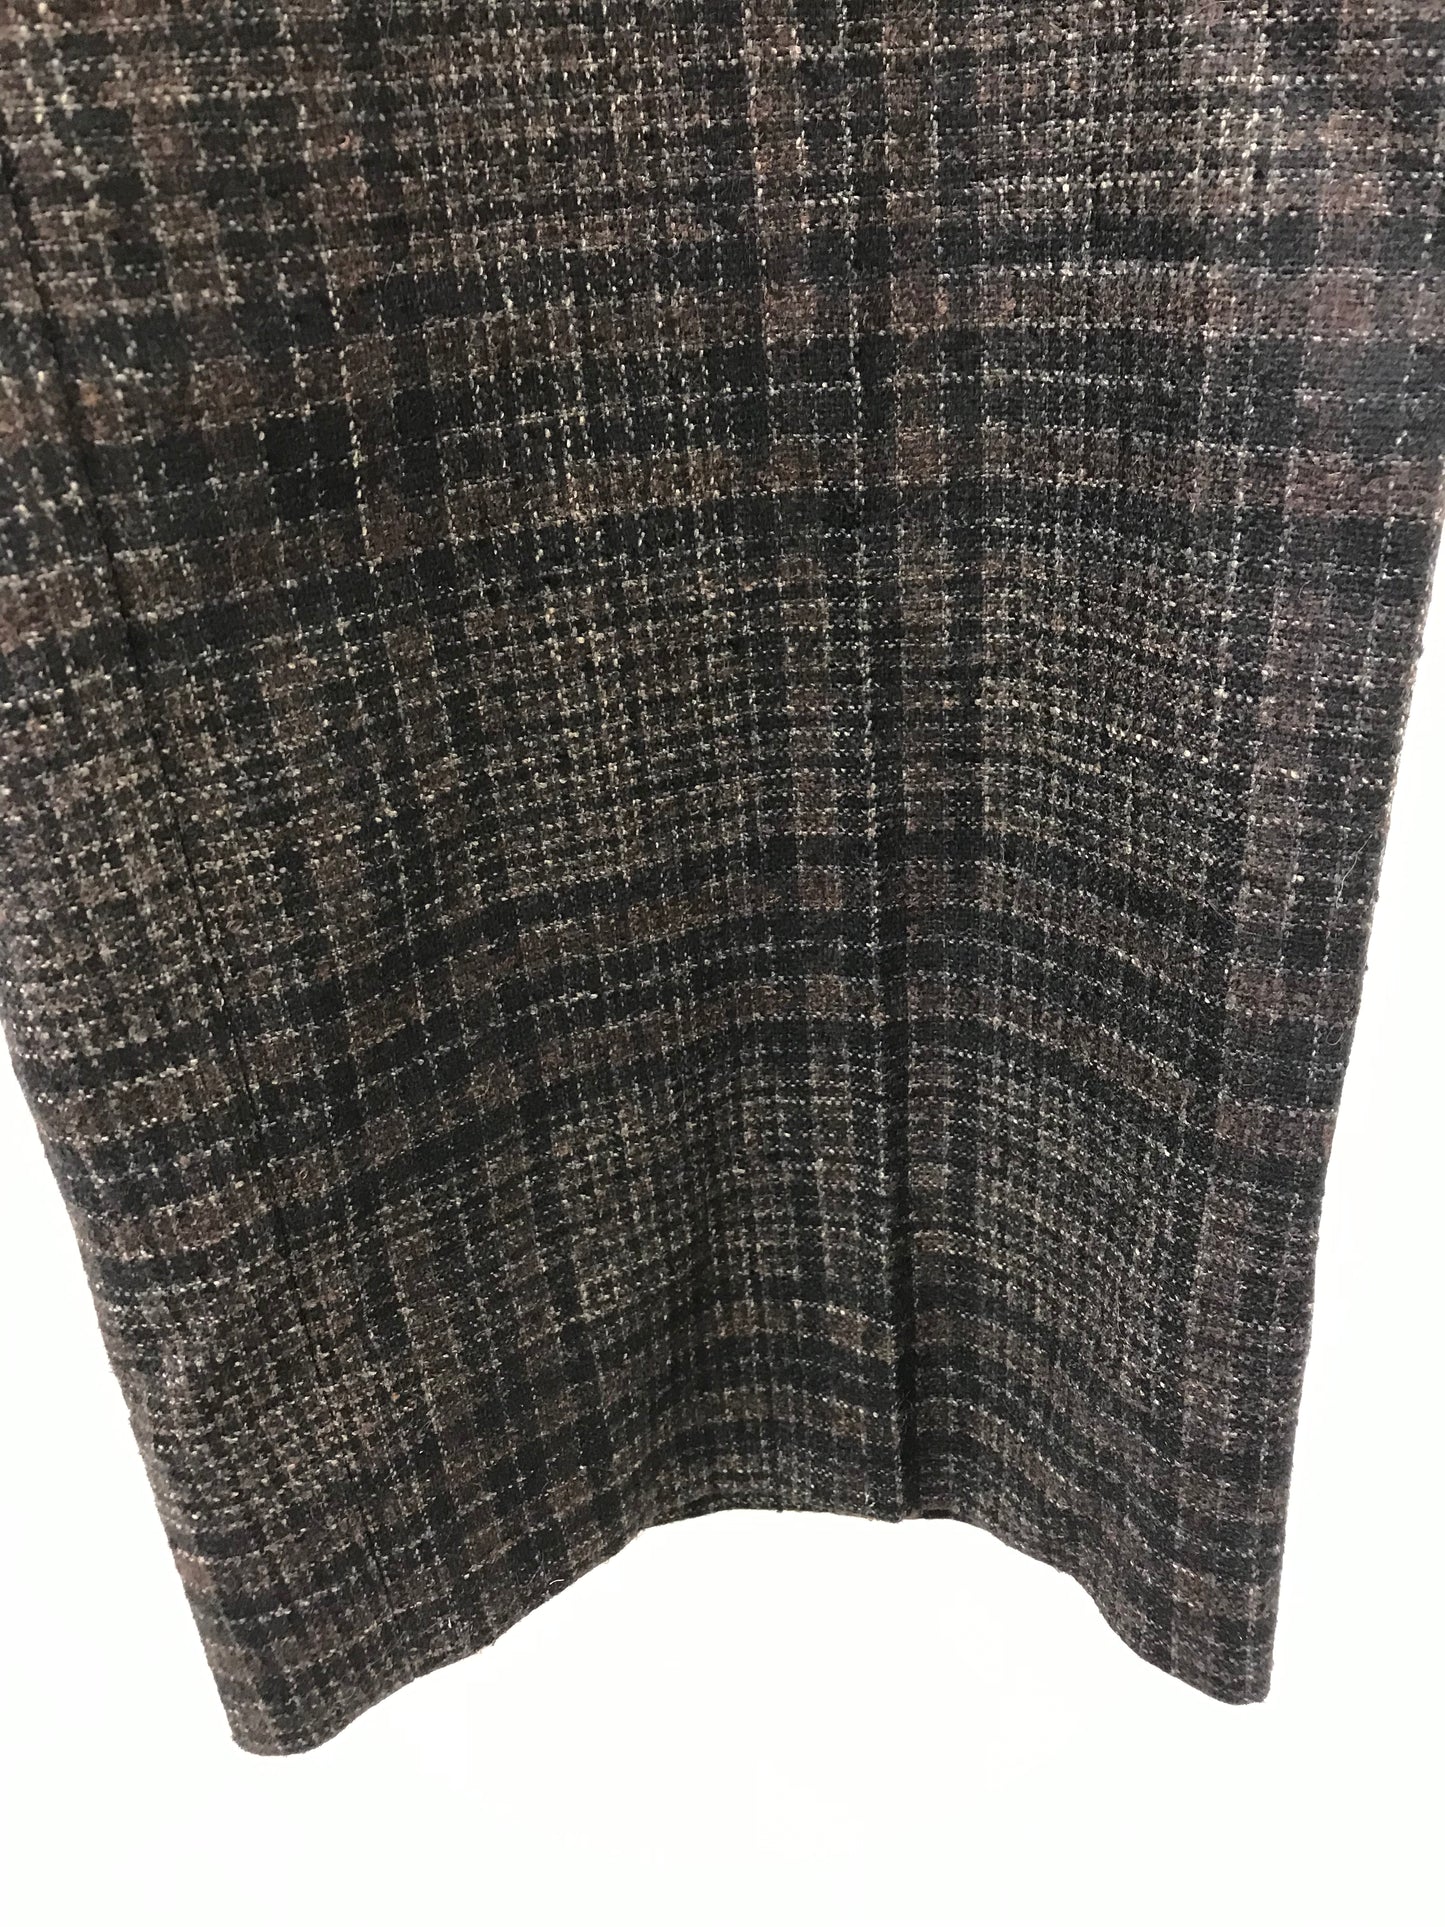 BNWT All Saints Brown Check Trousers Size 32